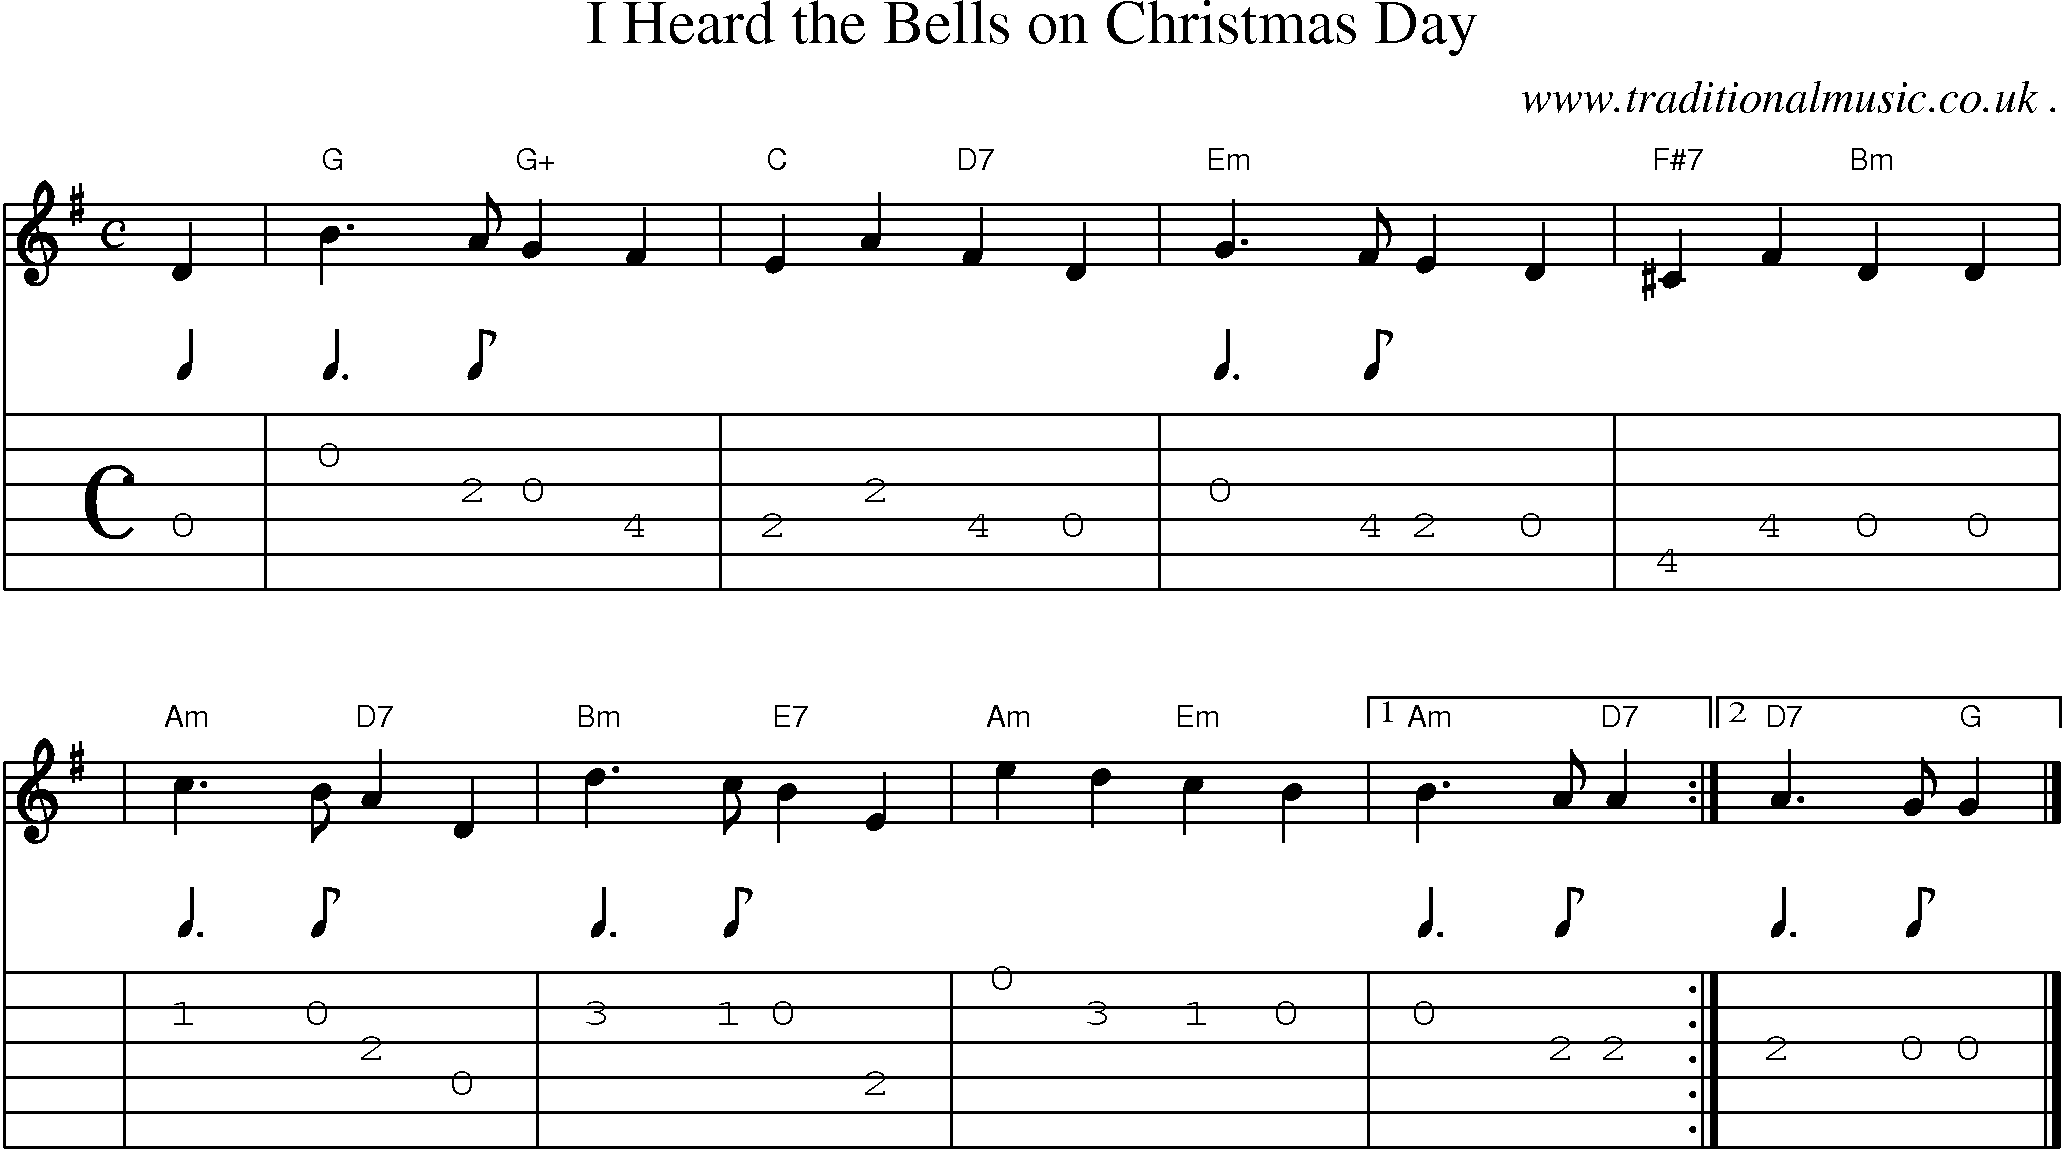 Sheet-music  score, Chords and Guitar Tabs for I Heard The Bells On Christmas Day